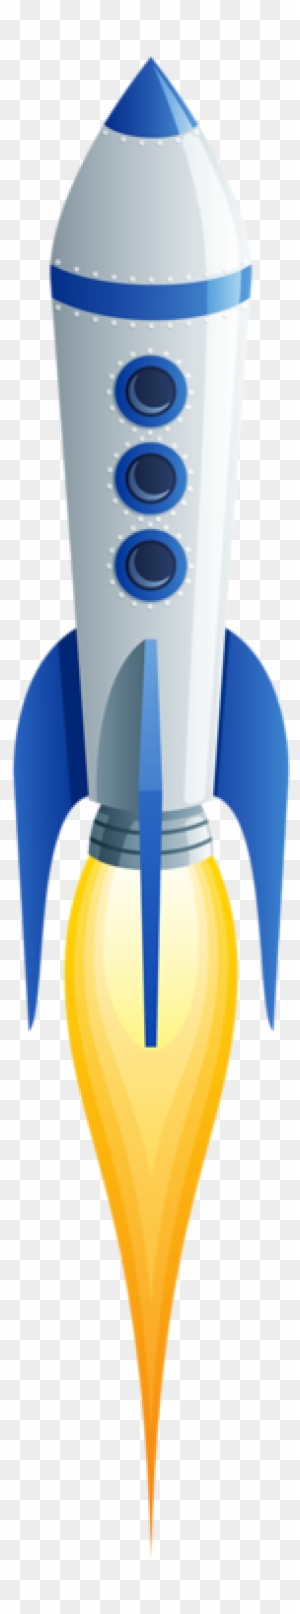 Cards - Rocket For Kids Cliparts